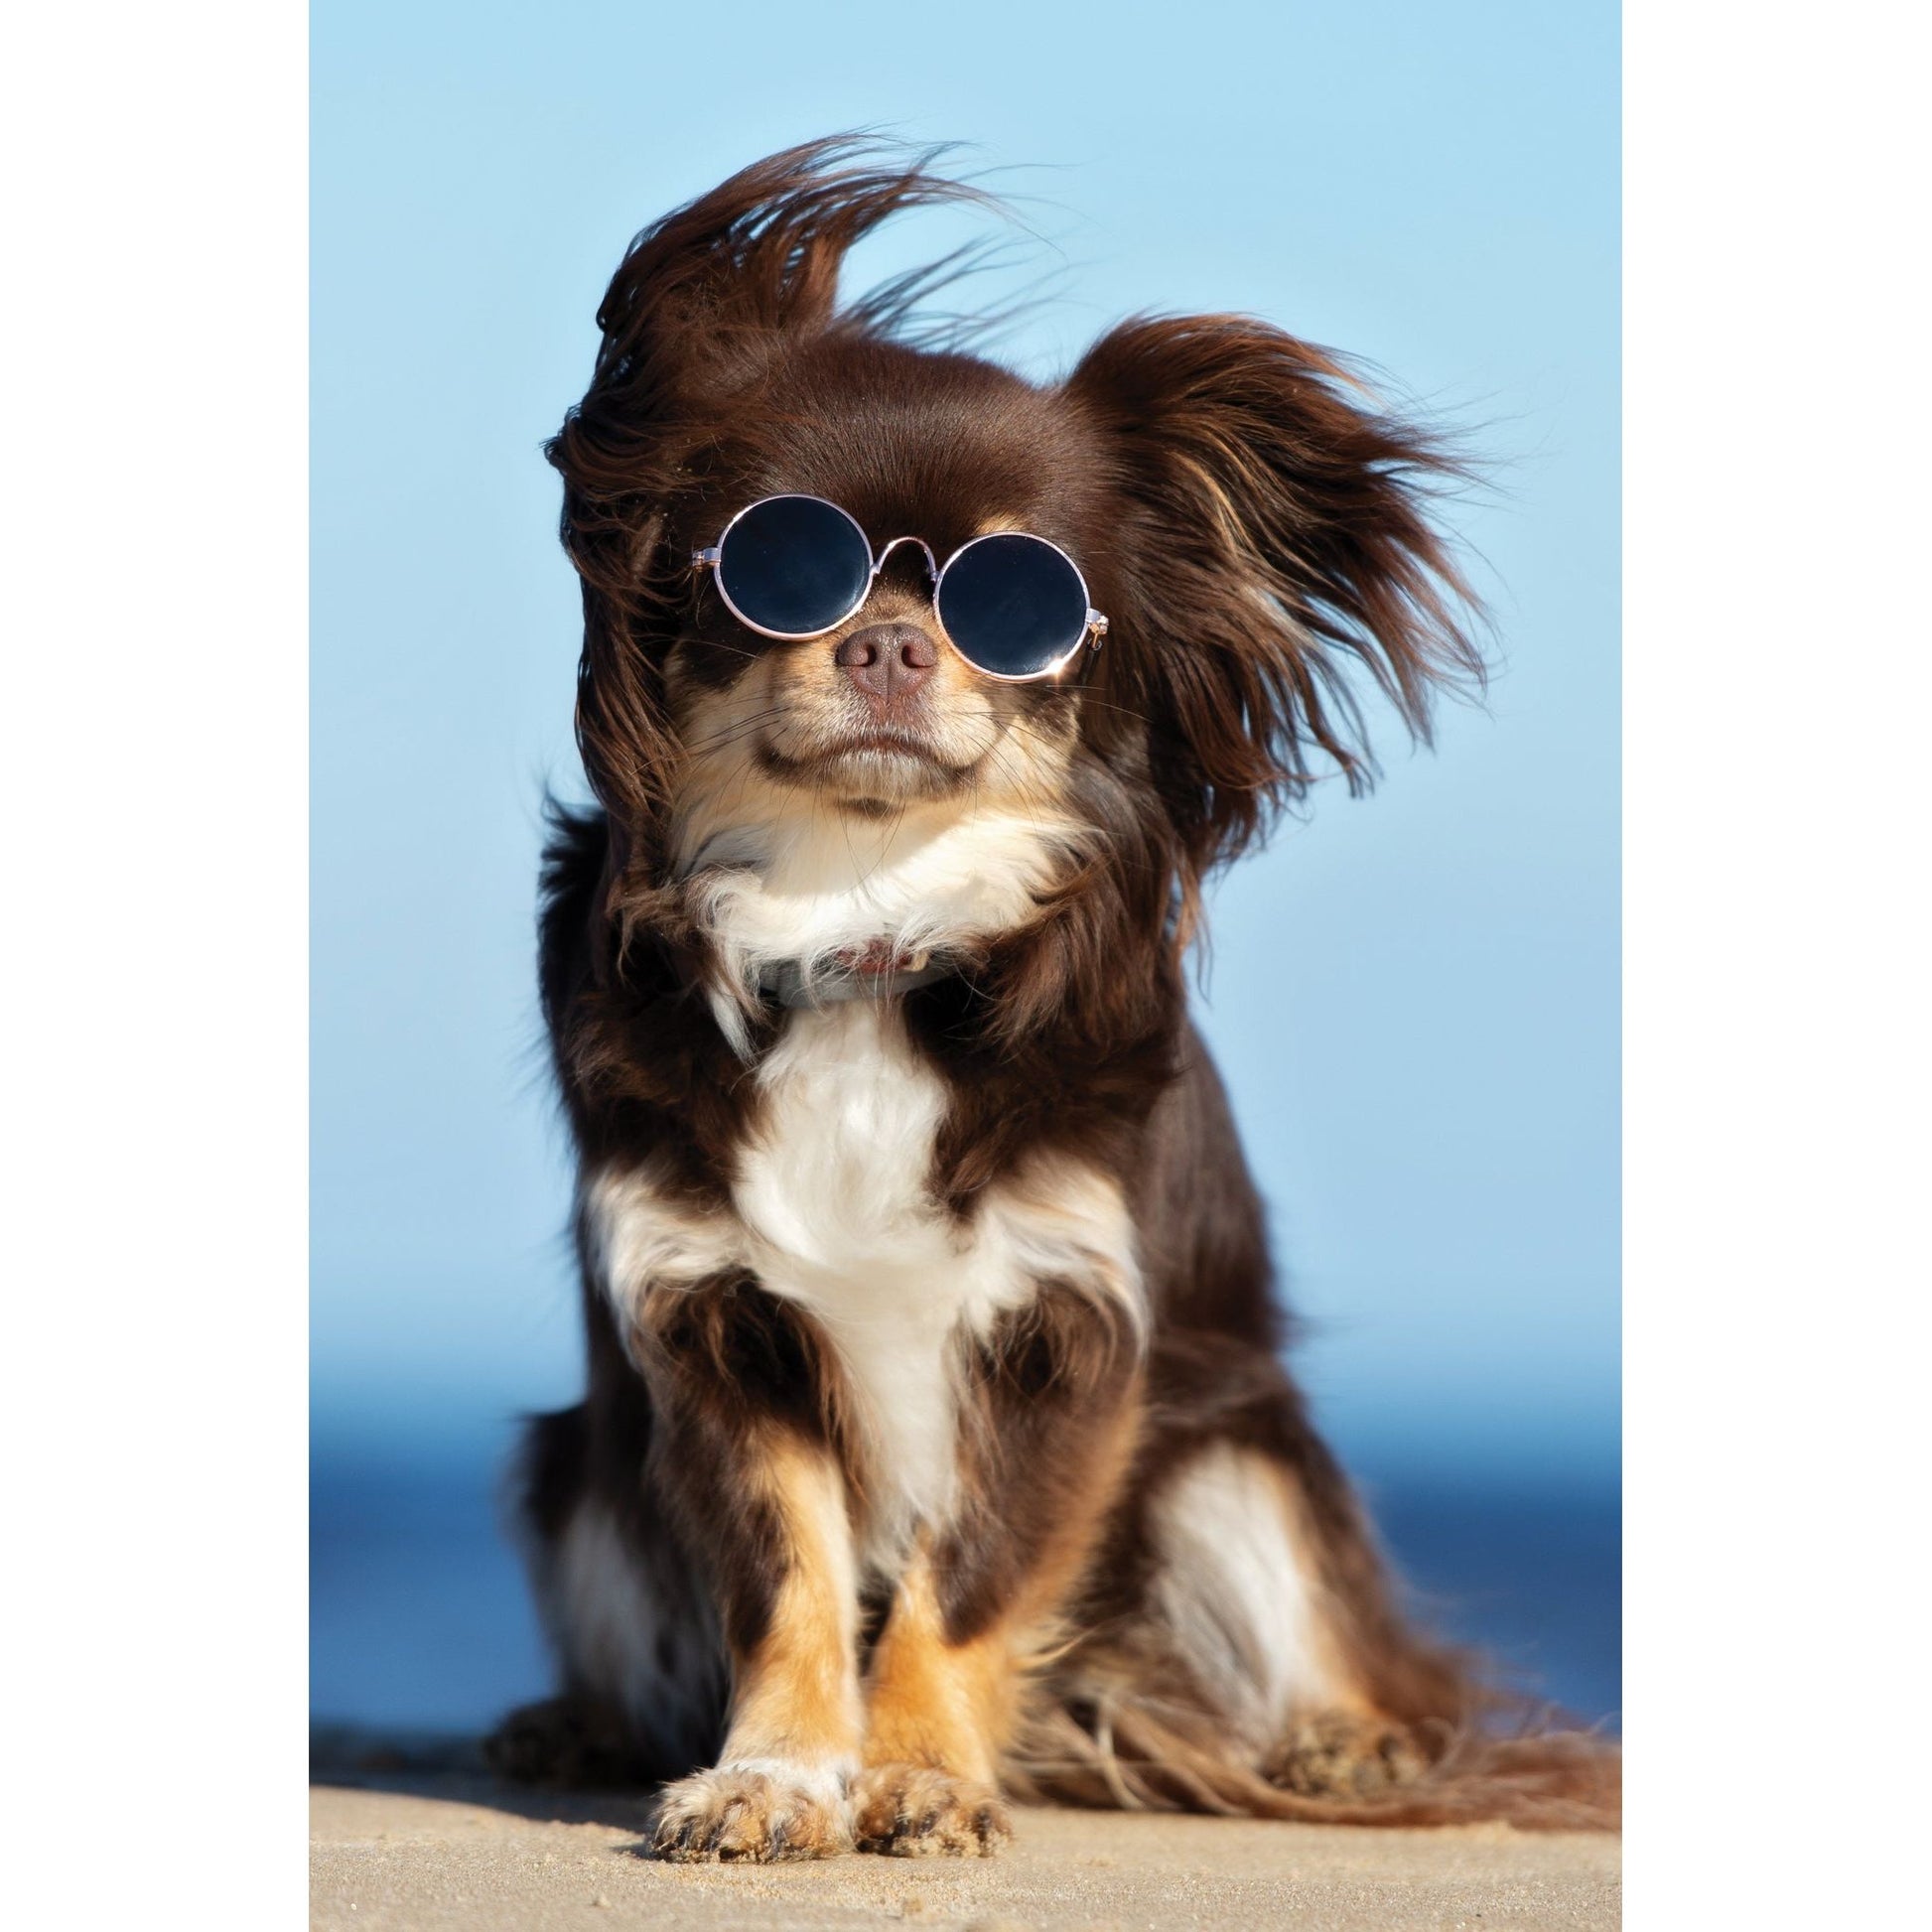 Sunglass Pup Funny Birthday Card - Cardmore